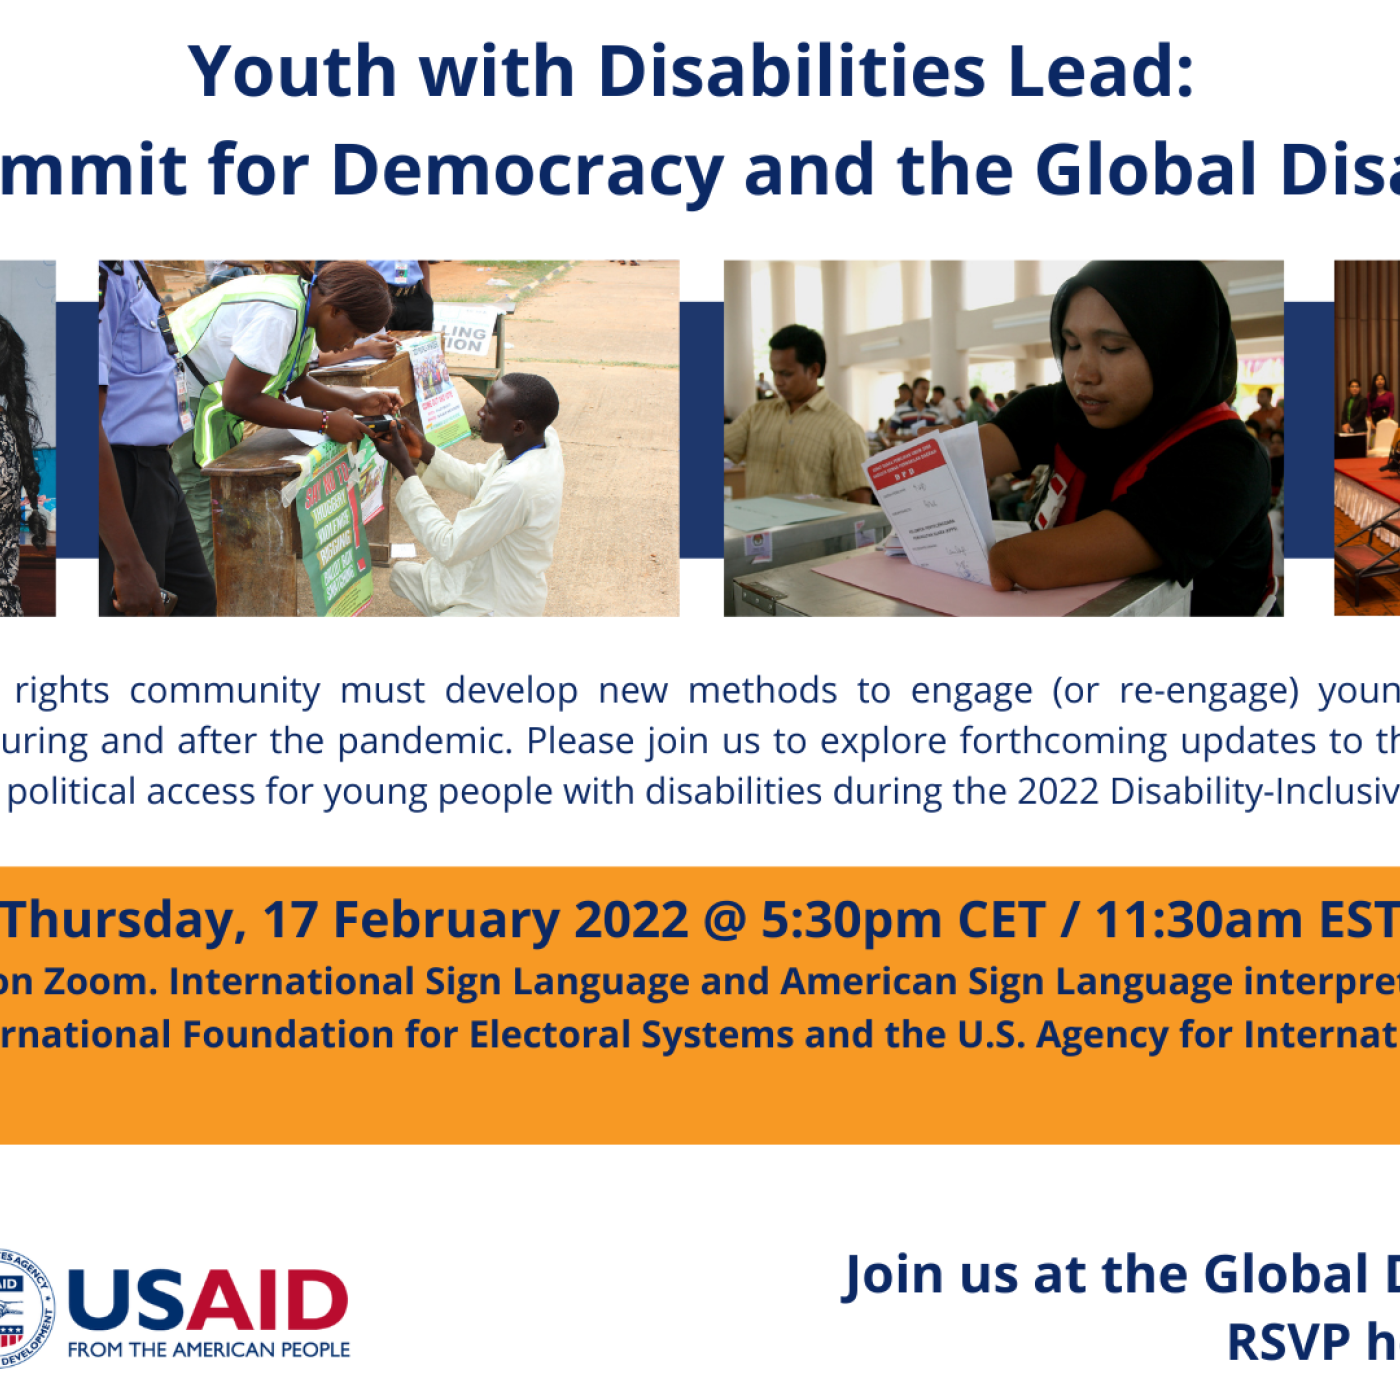 Youth with Disabilities Lead: Linking the Summit for Democracy and the Global Disability Summit Transforming obligation into ac The democracy and human rights community must develop new methods to engage (or re-engage) young people with disabilities in de